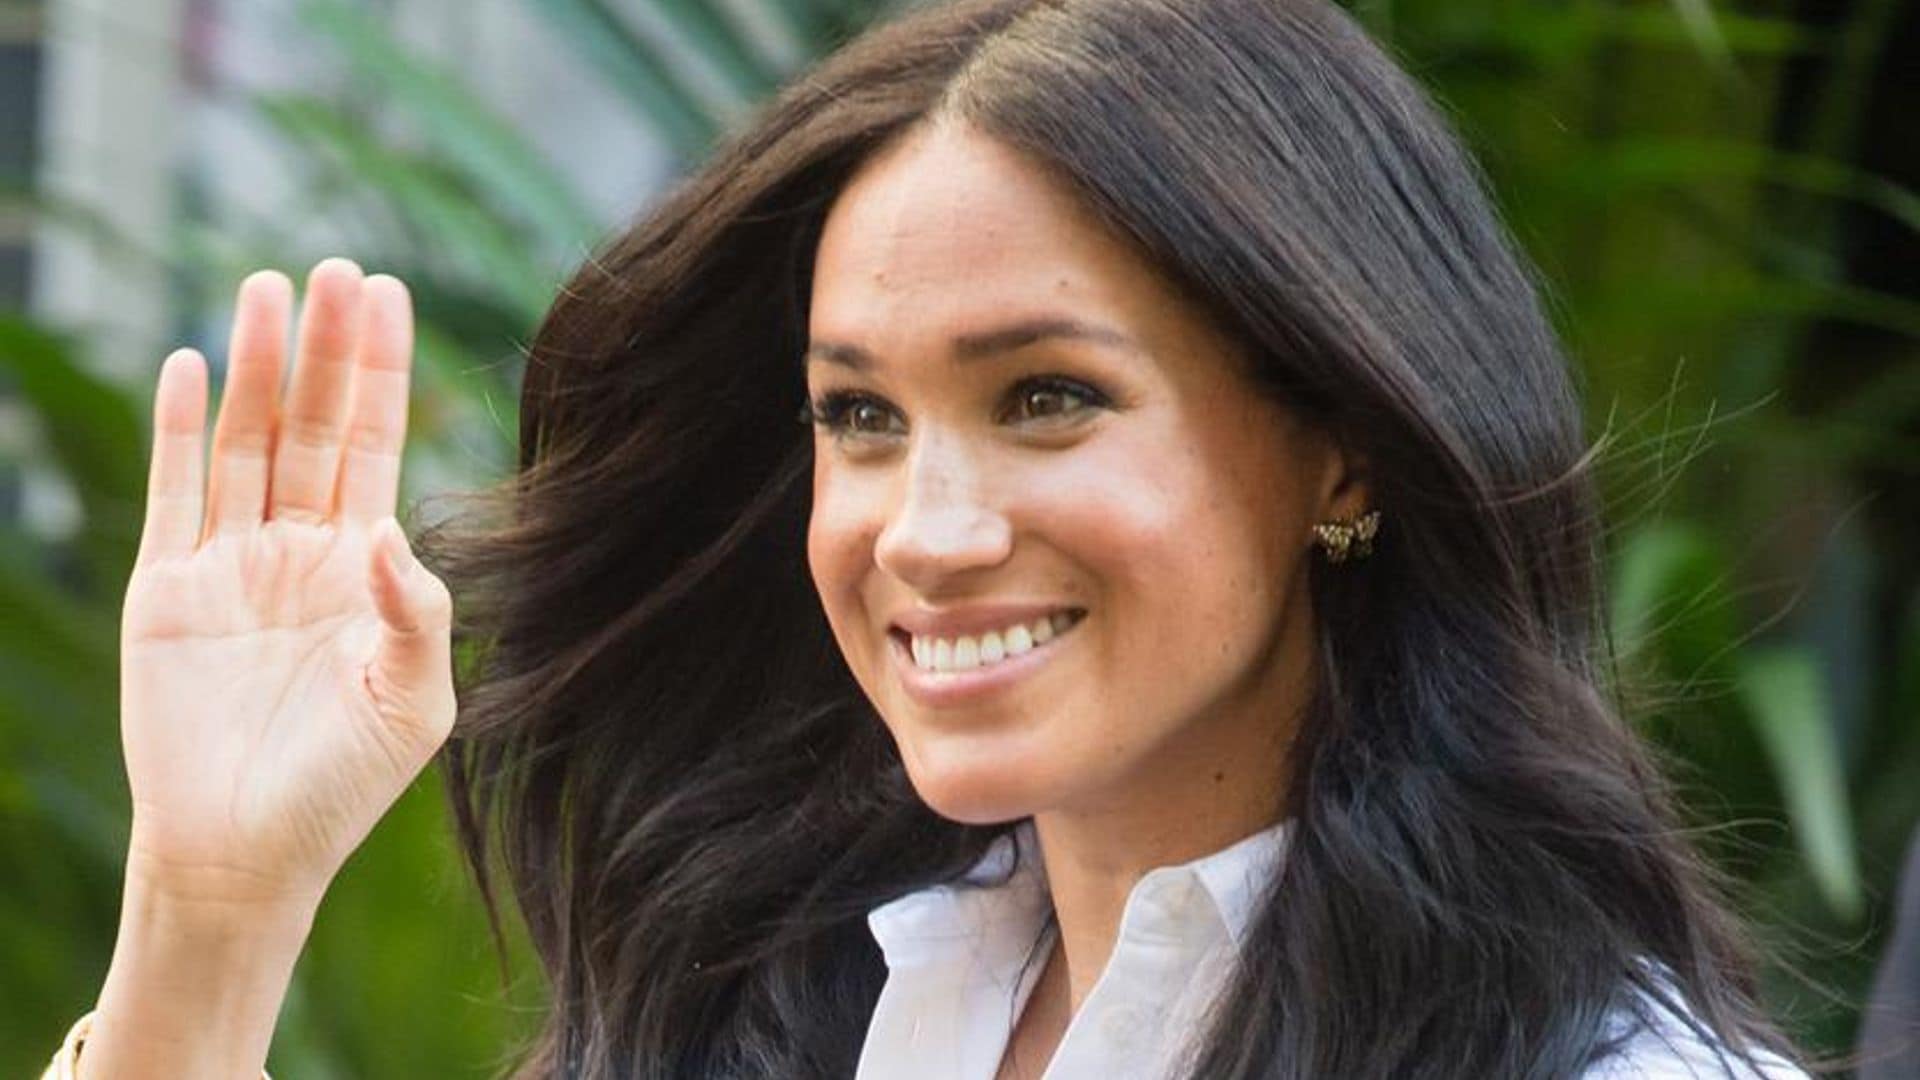 Meghan Markle Capsule Collection